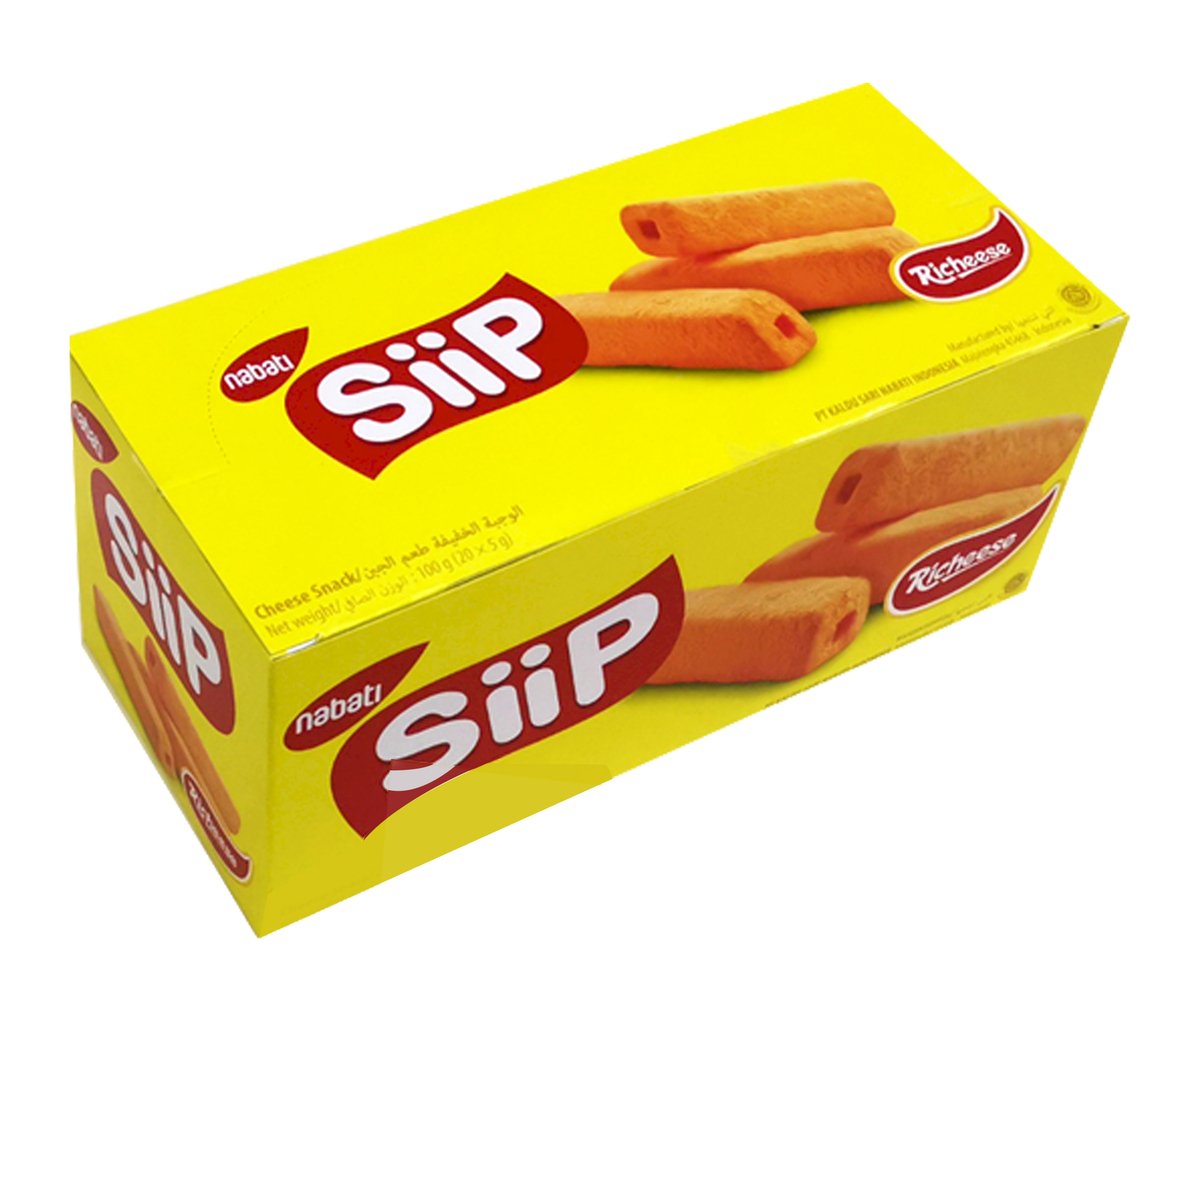 Richeese Siip Cheese Corn Snack 20 x 5 g